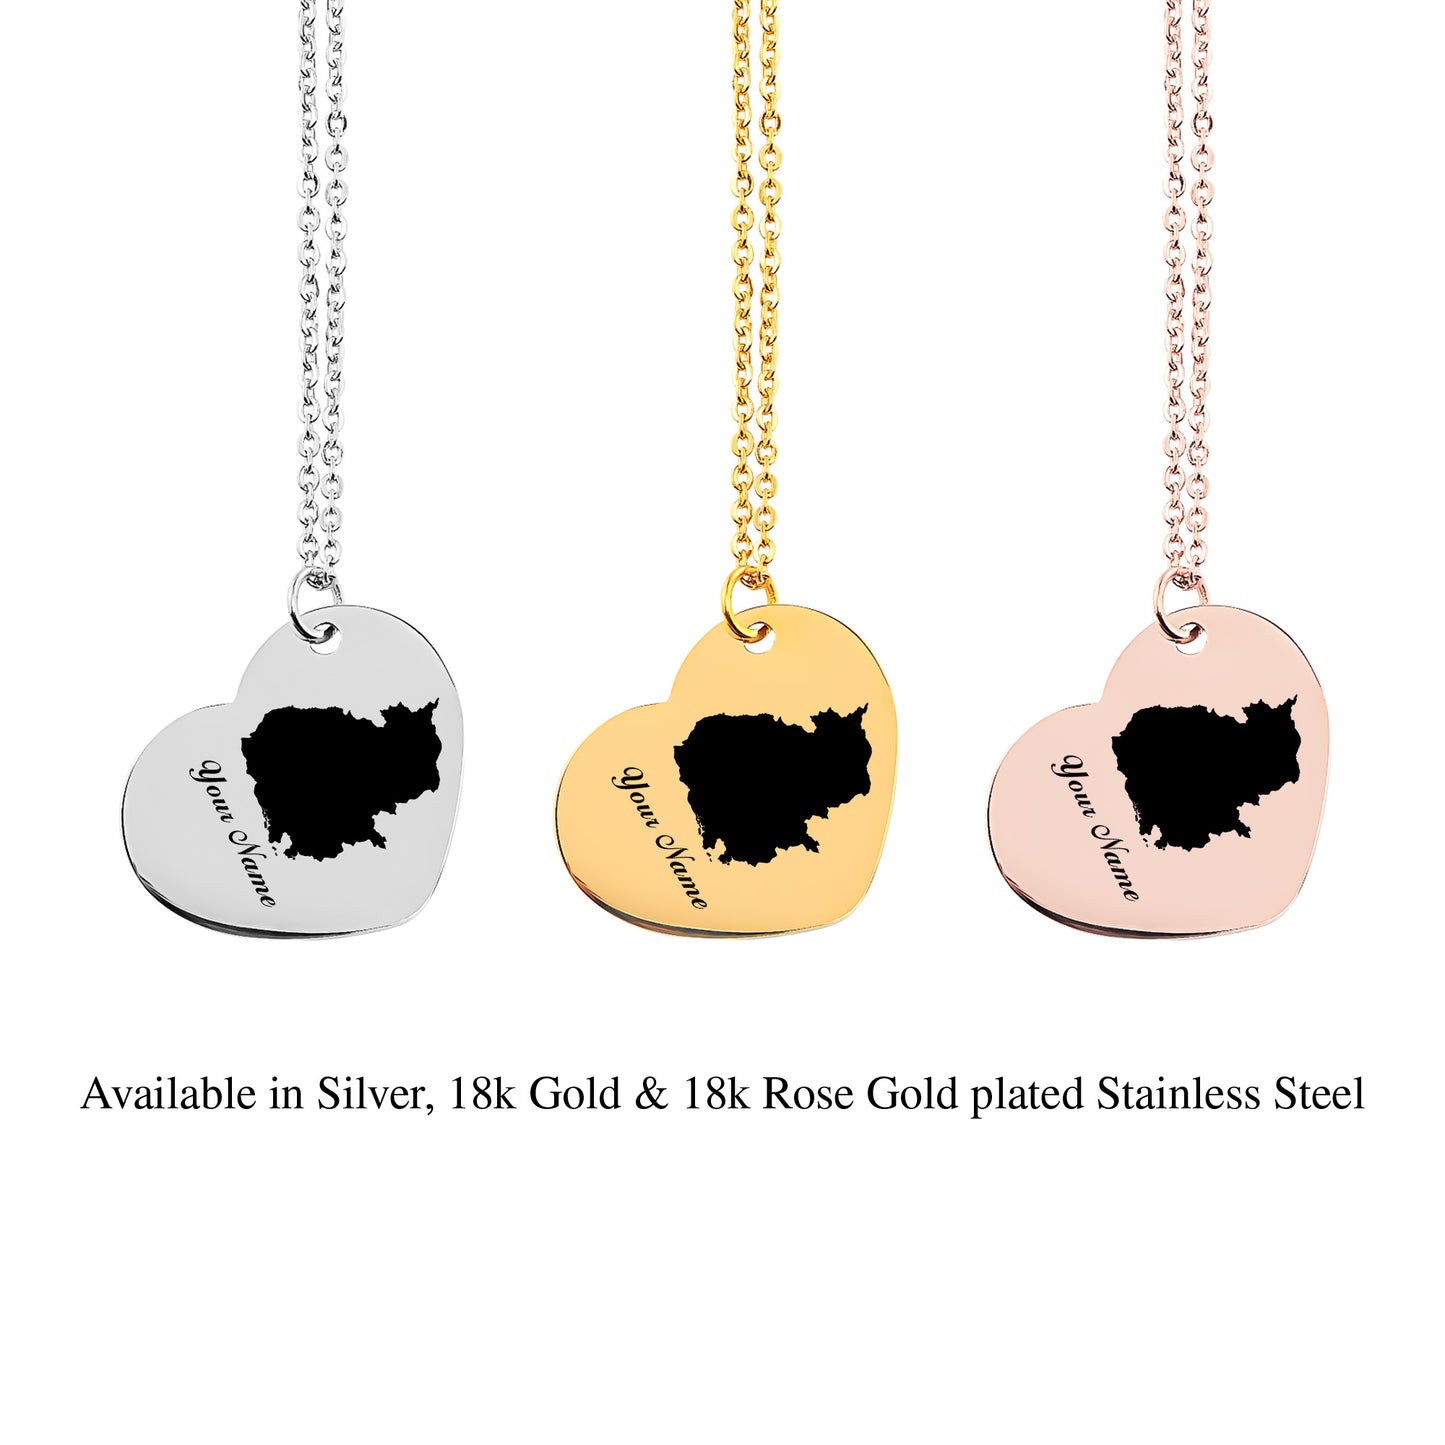 Cambodia Country Map Necklace - Personalizable Jewelry